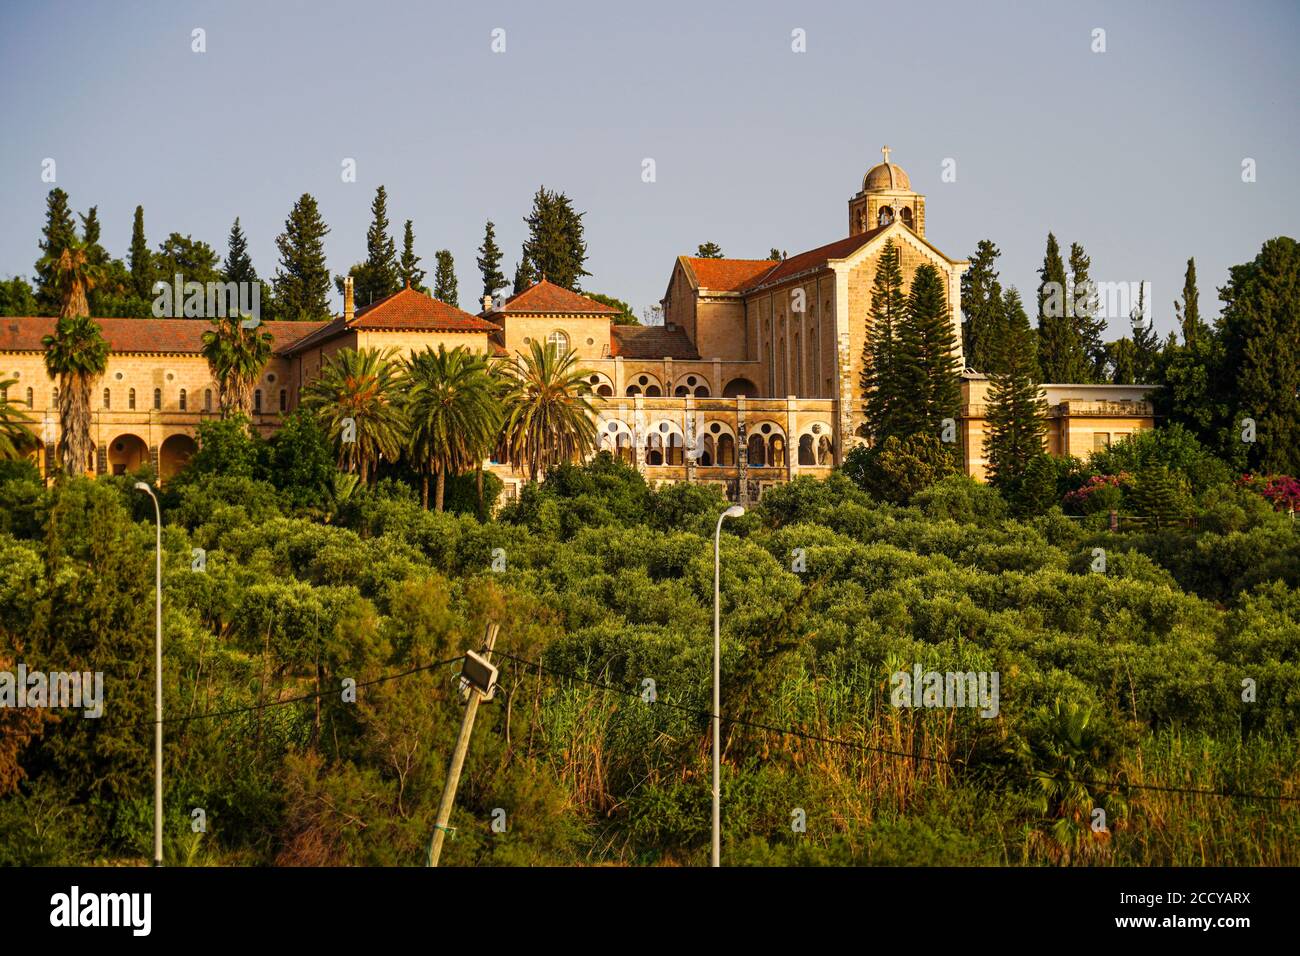 Israel, Ayalon Valley, Exterior of the Latrun Trappist Monastery. founded in In the year 1887 by French monks of the Trappist order. The monks establi Stock Photo